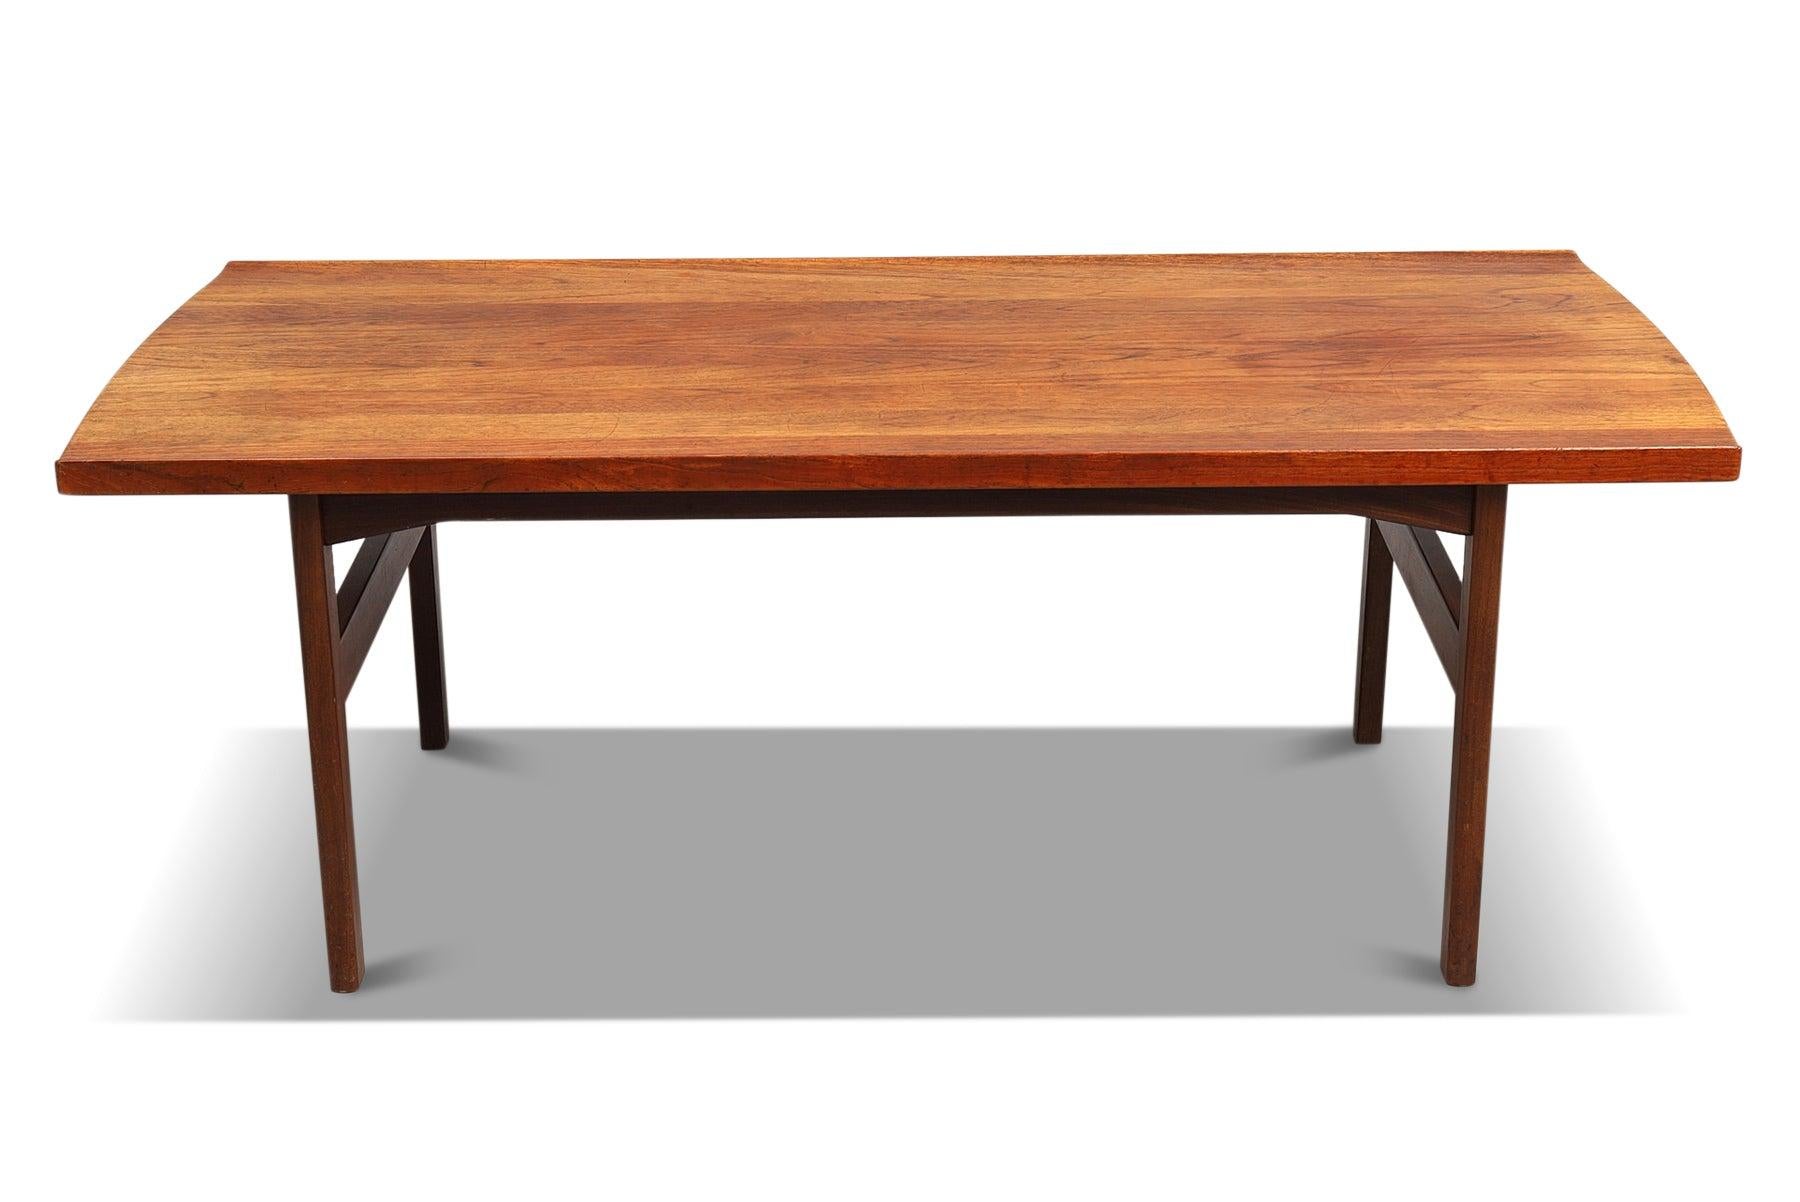 Mid-Century Modern Solid Teak Coffee Table by Tove + Edvard Kindt-Larsen #2 For Sale